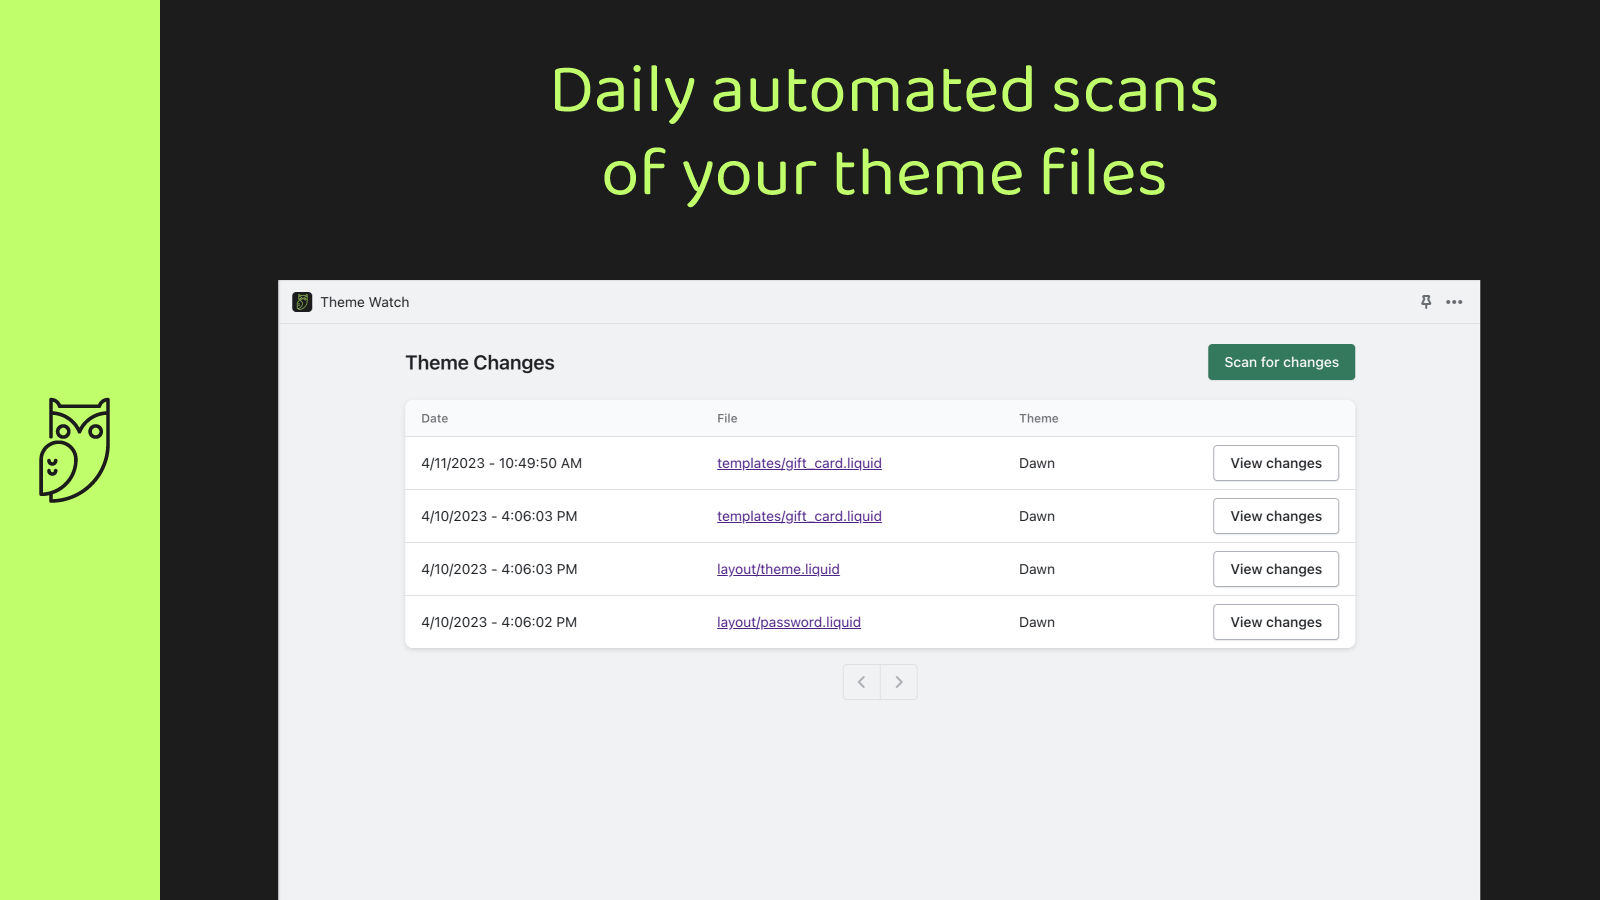 Daily automated scans of your theme files.